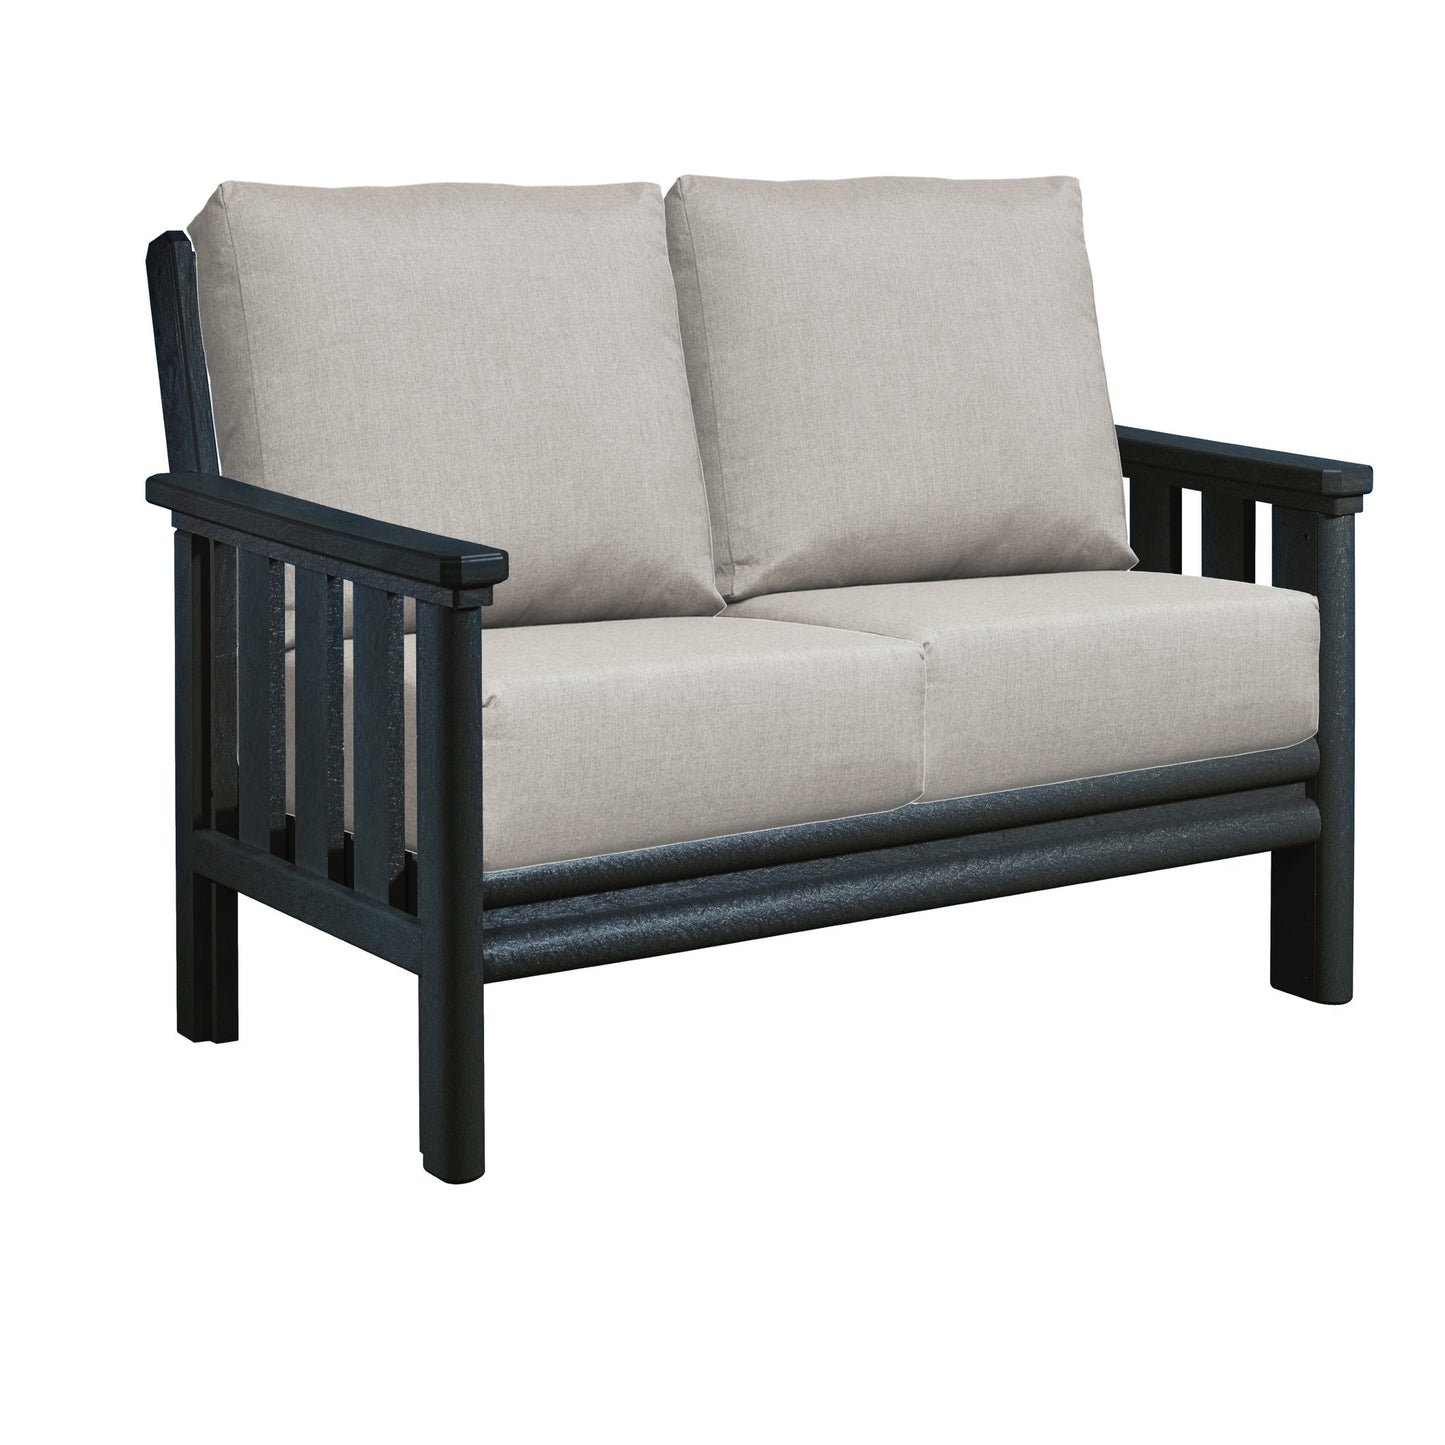 Stratford Loveseat BLACK FRAME WITH CUSHIONS - DSF262